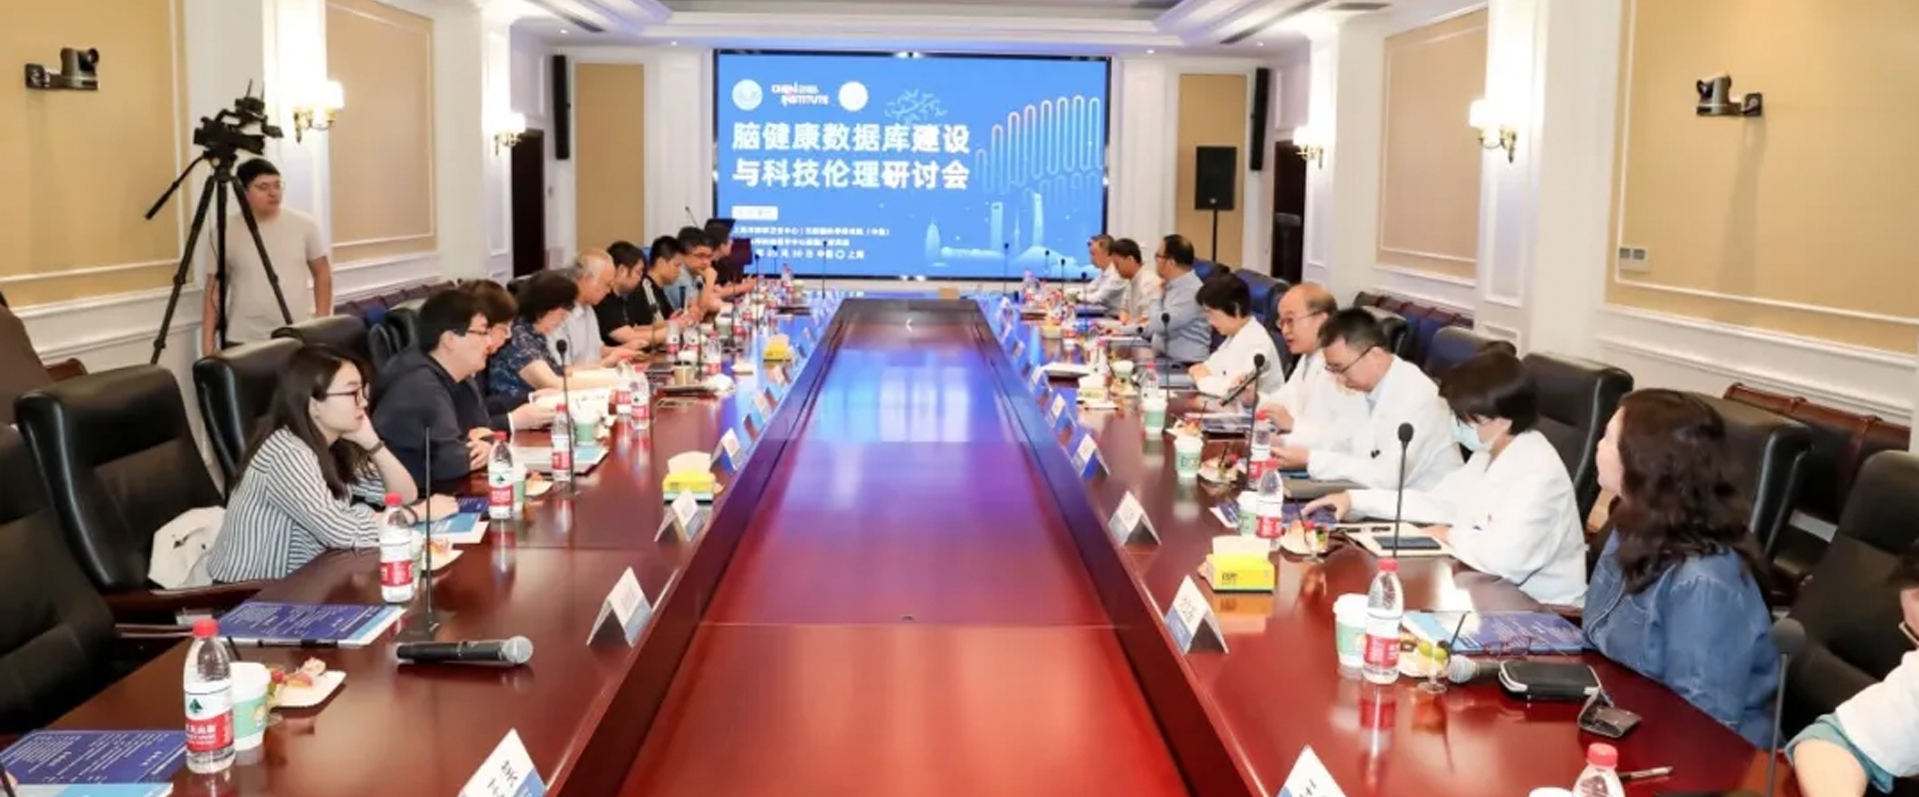 Tianqiao and Chrissy Chen Institute (China) Organizes a Seminar on Brain Health Database Construction and Ethics of Science and Technology: How to Balance Scientific and Technological Advancement with Ethics?